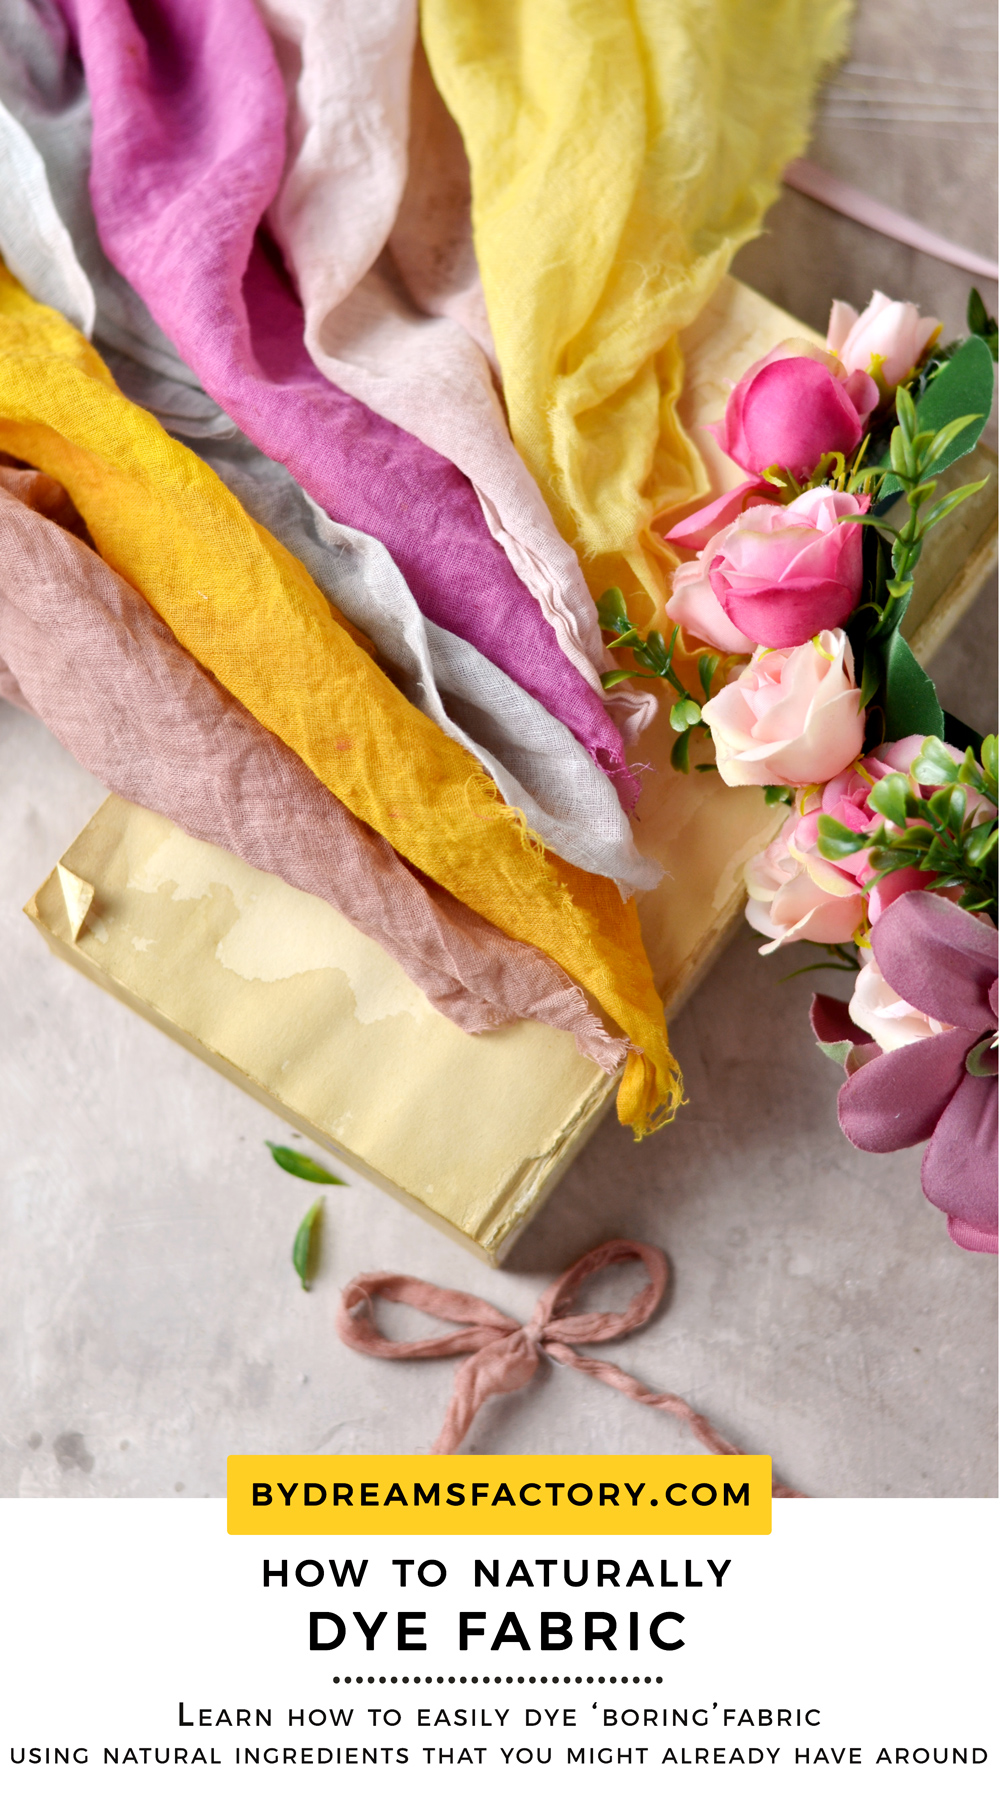 How to make natural dyes for fabric - a few beautiful and colorful  experiments - Dreams Factory